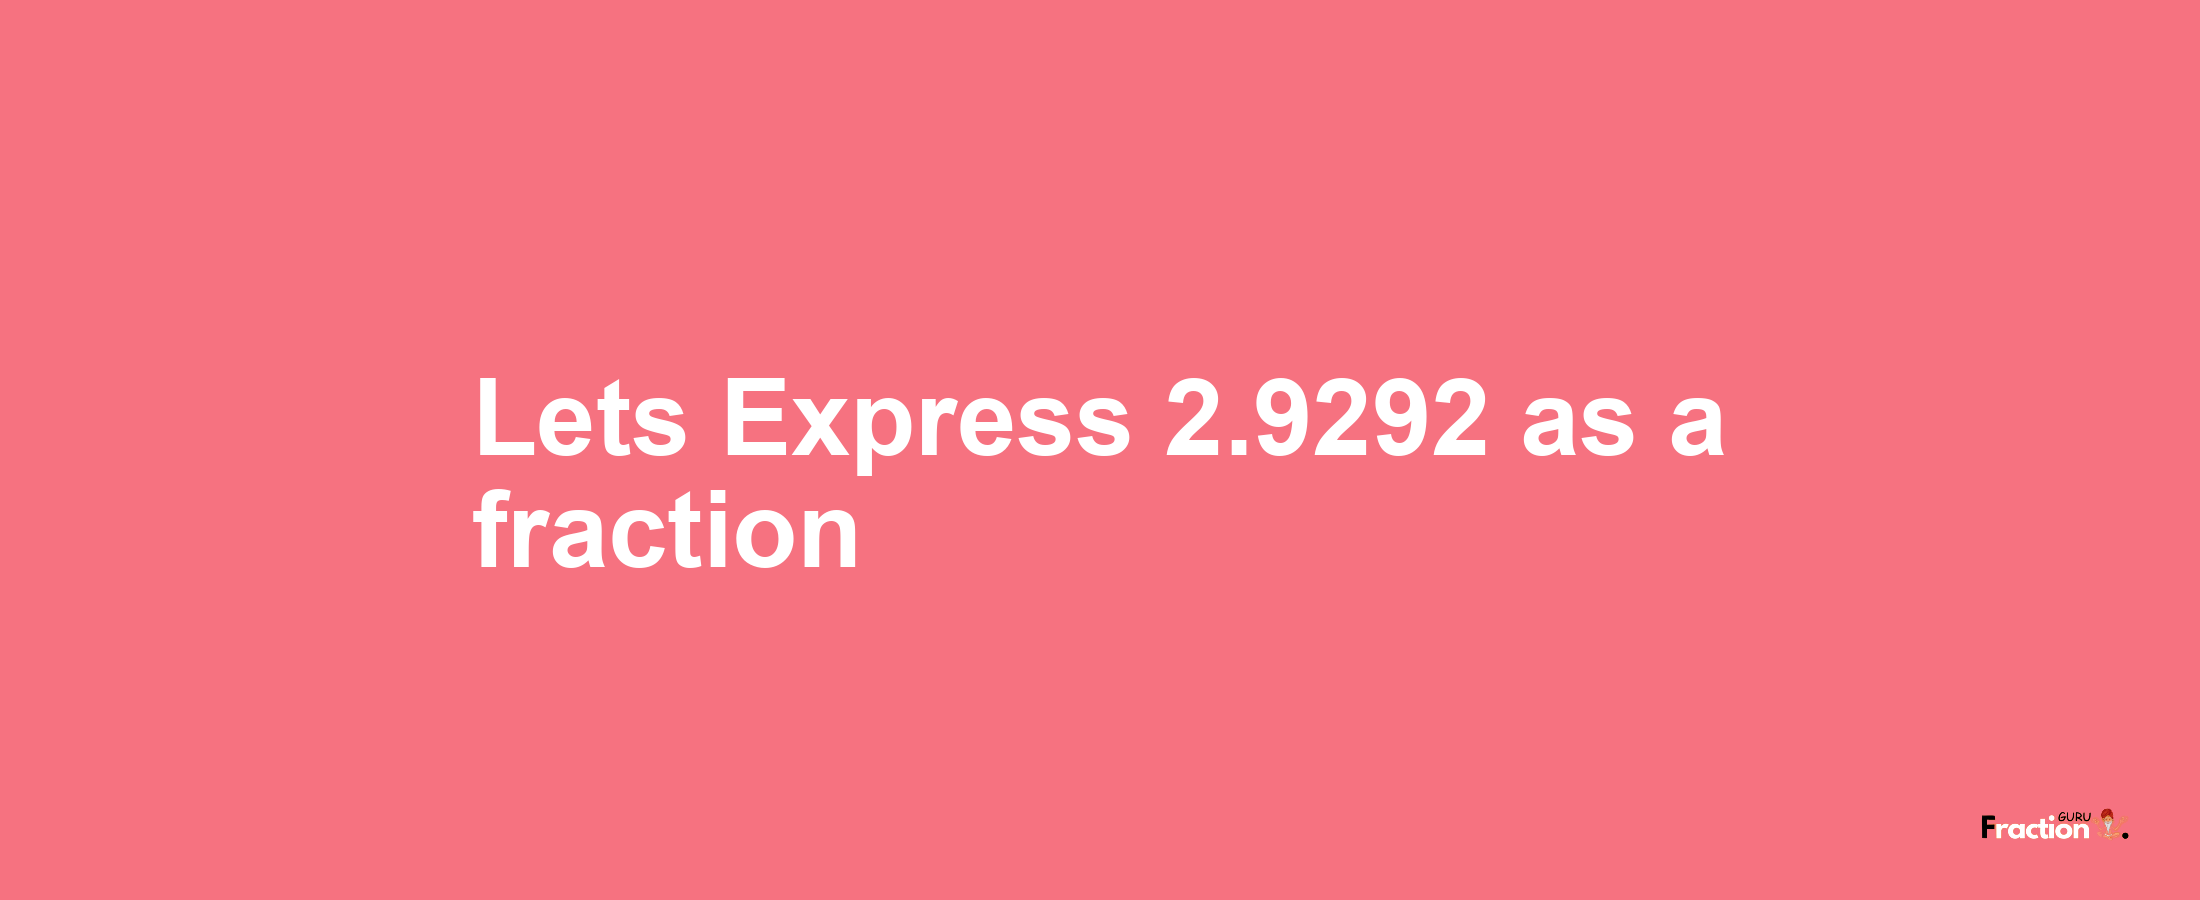 Lets Express 2.9292 as afraction